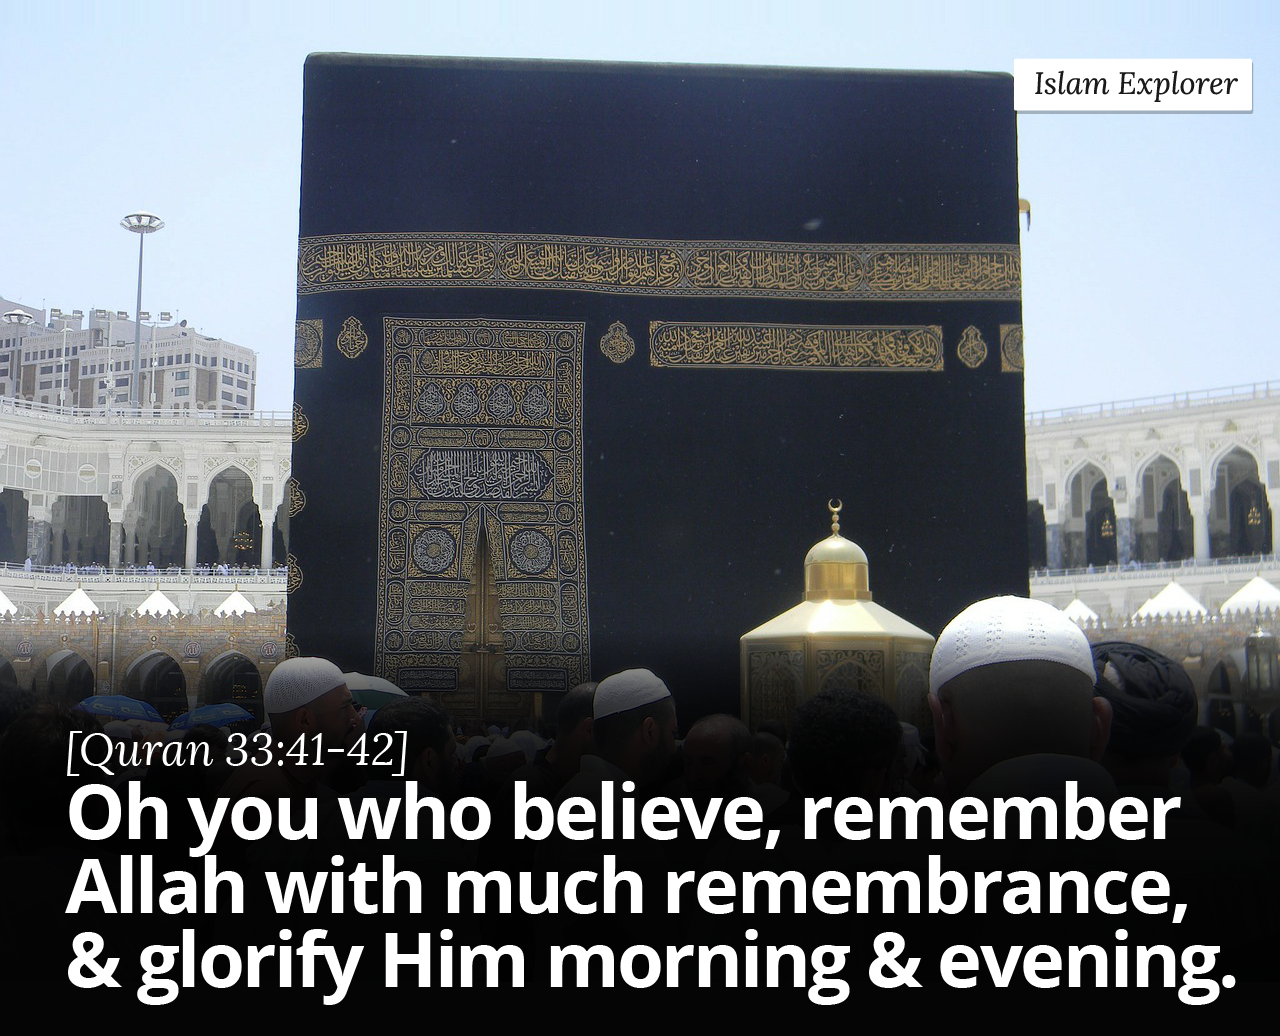 , remember Allah with much remembrance